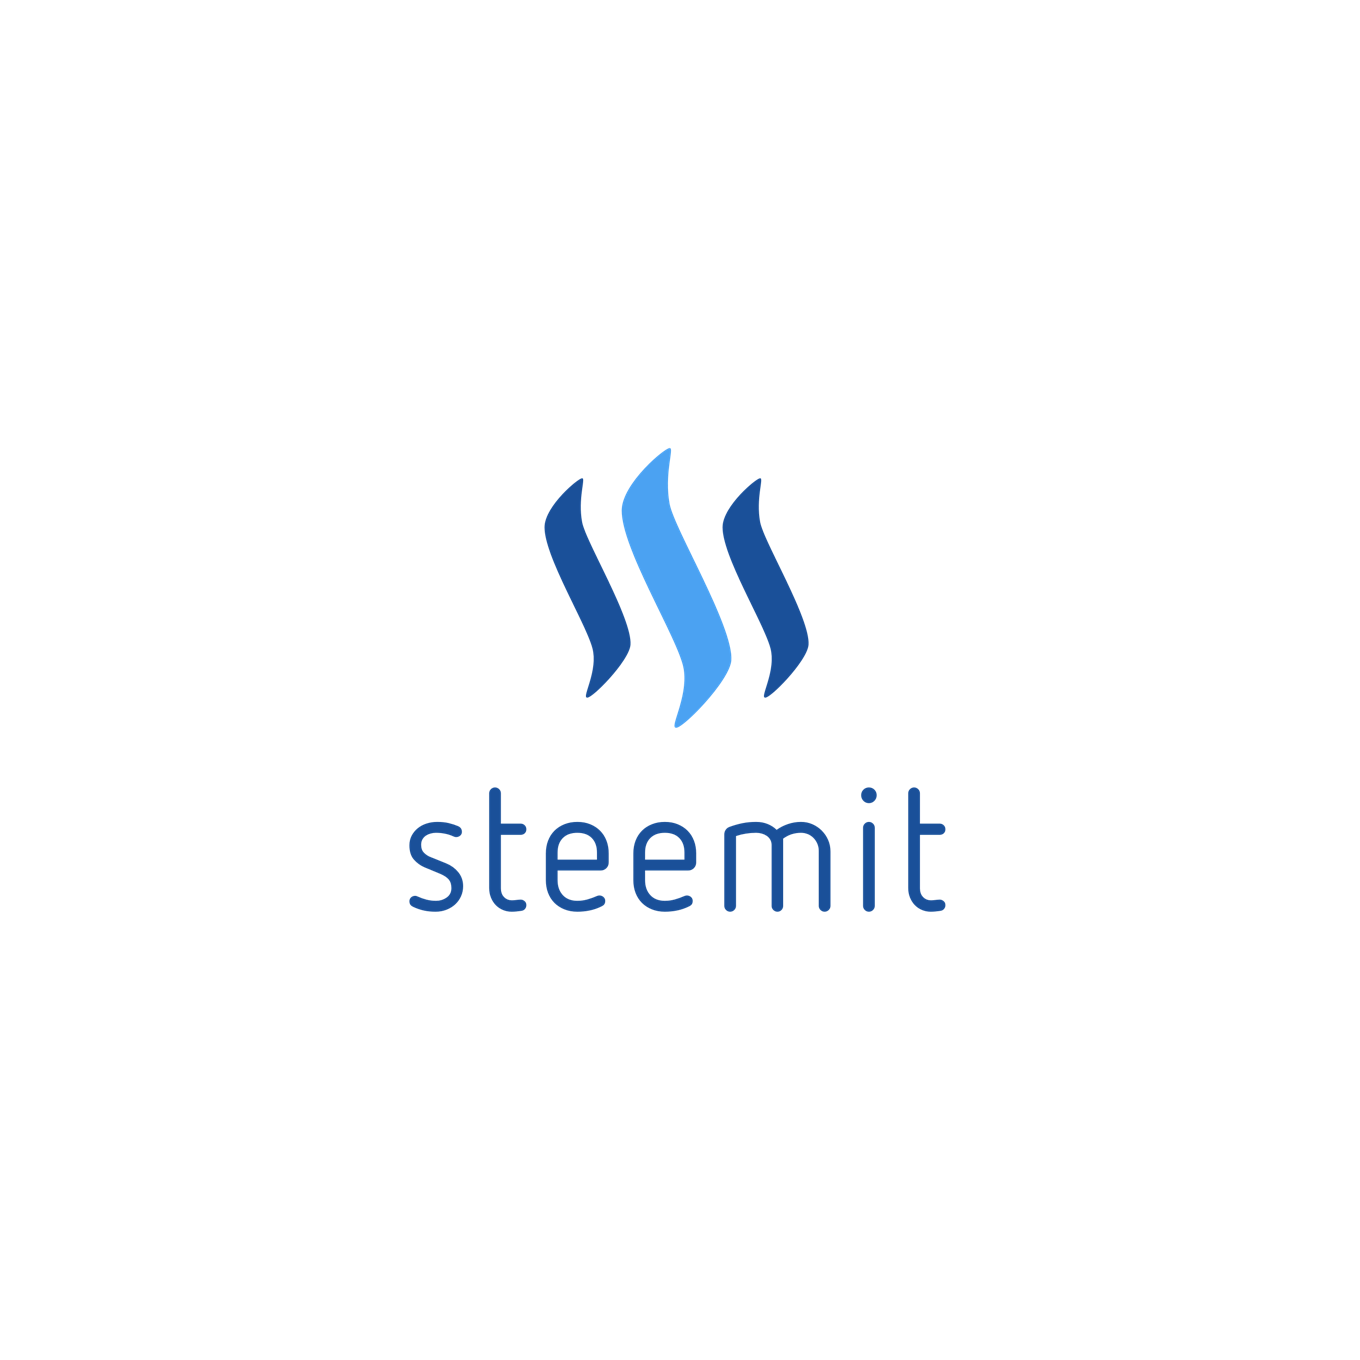 Social network Steemit distributes $1.3 million in first
cryptocurrency payout to users